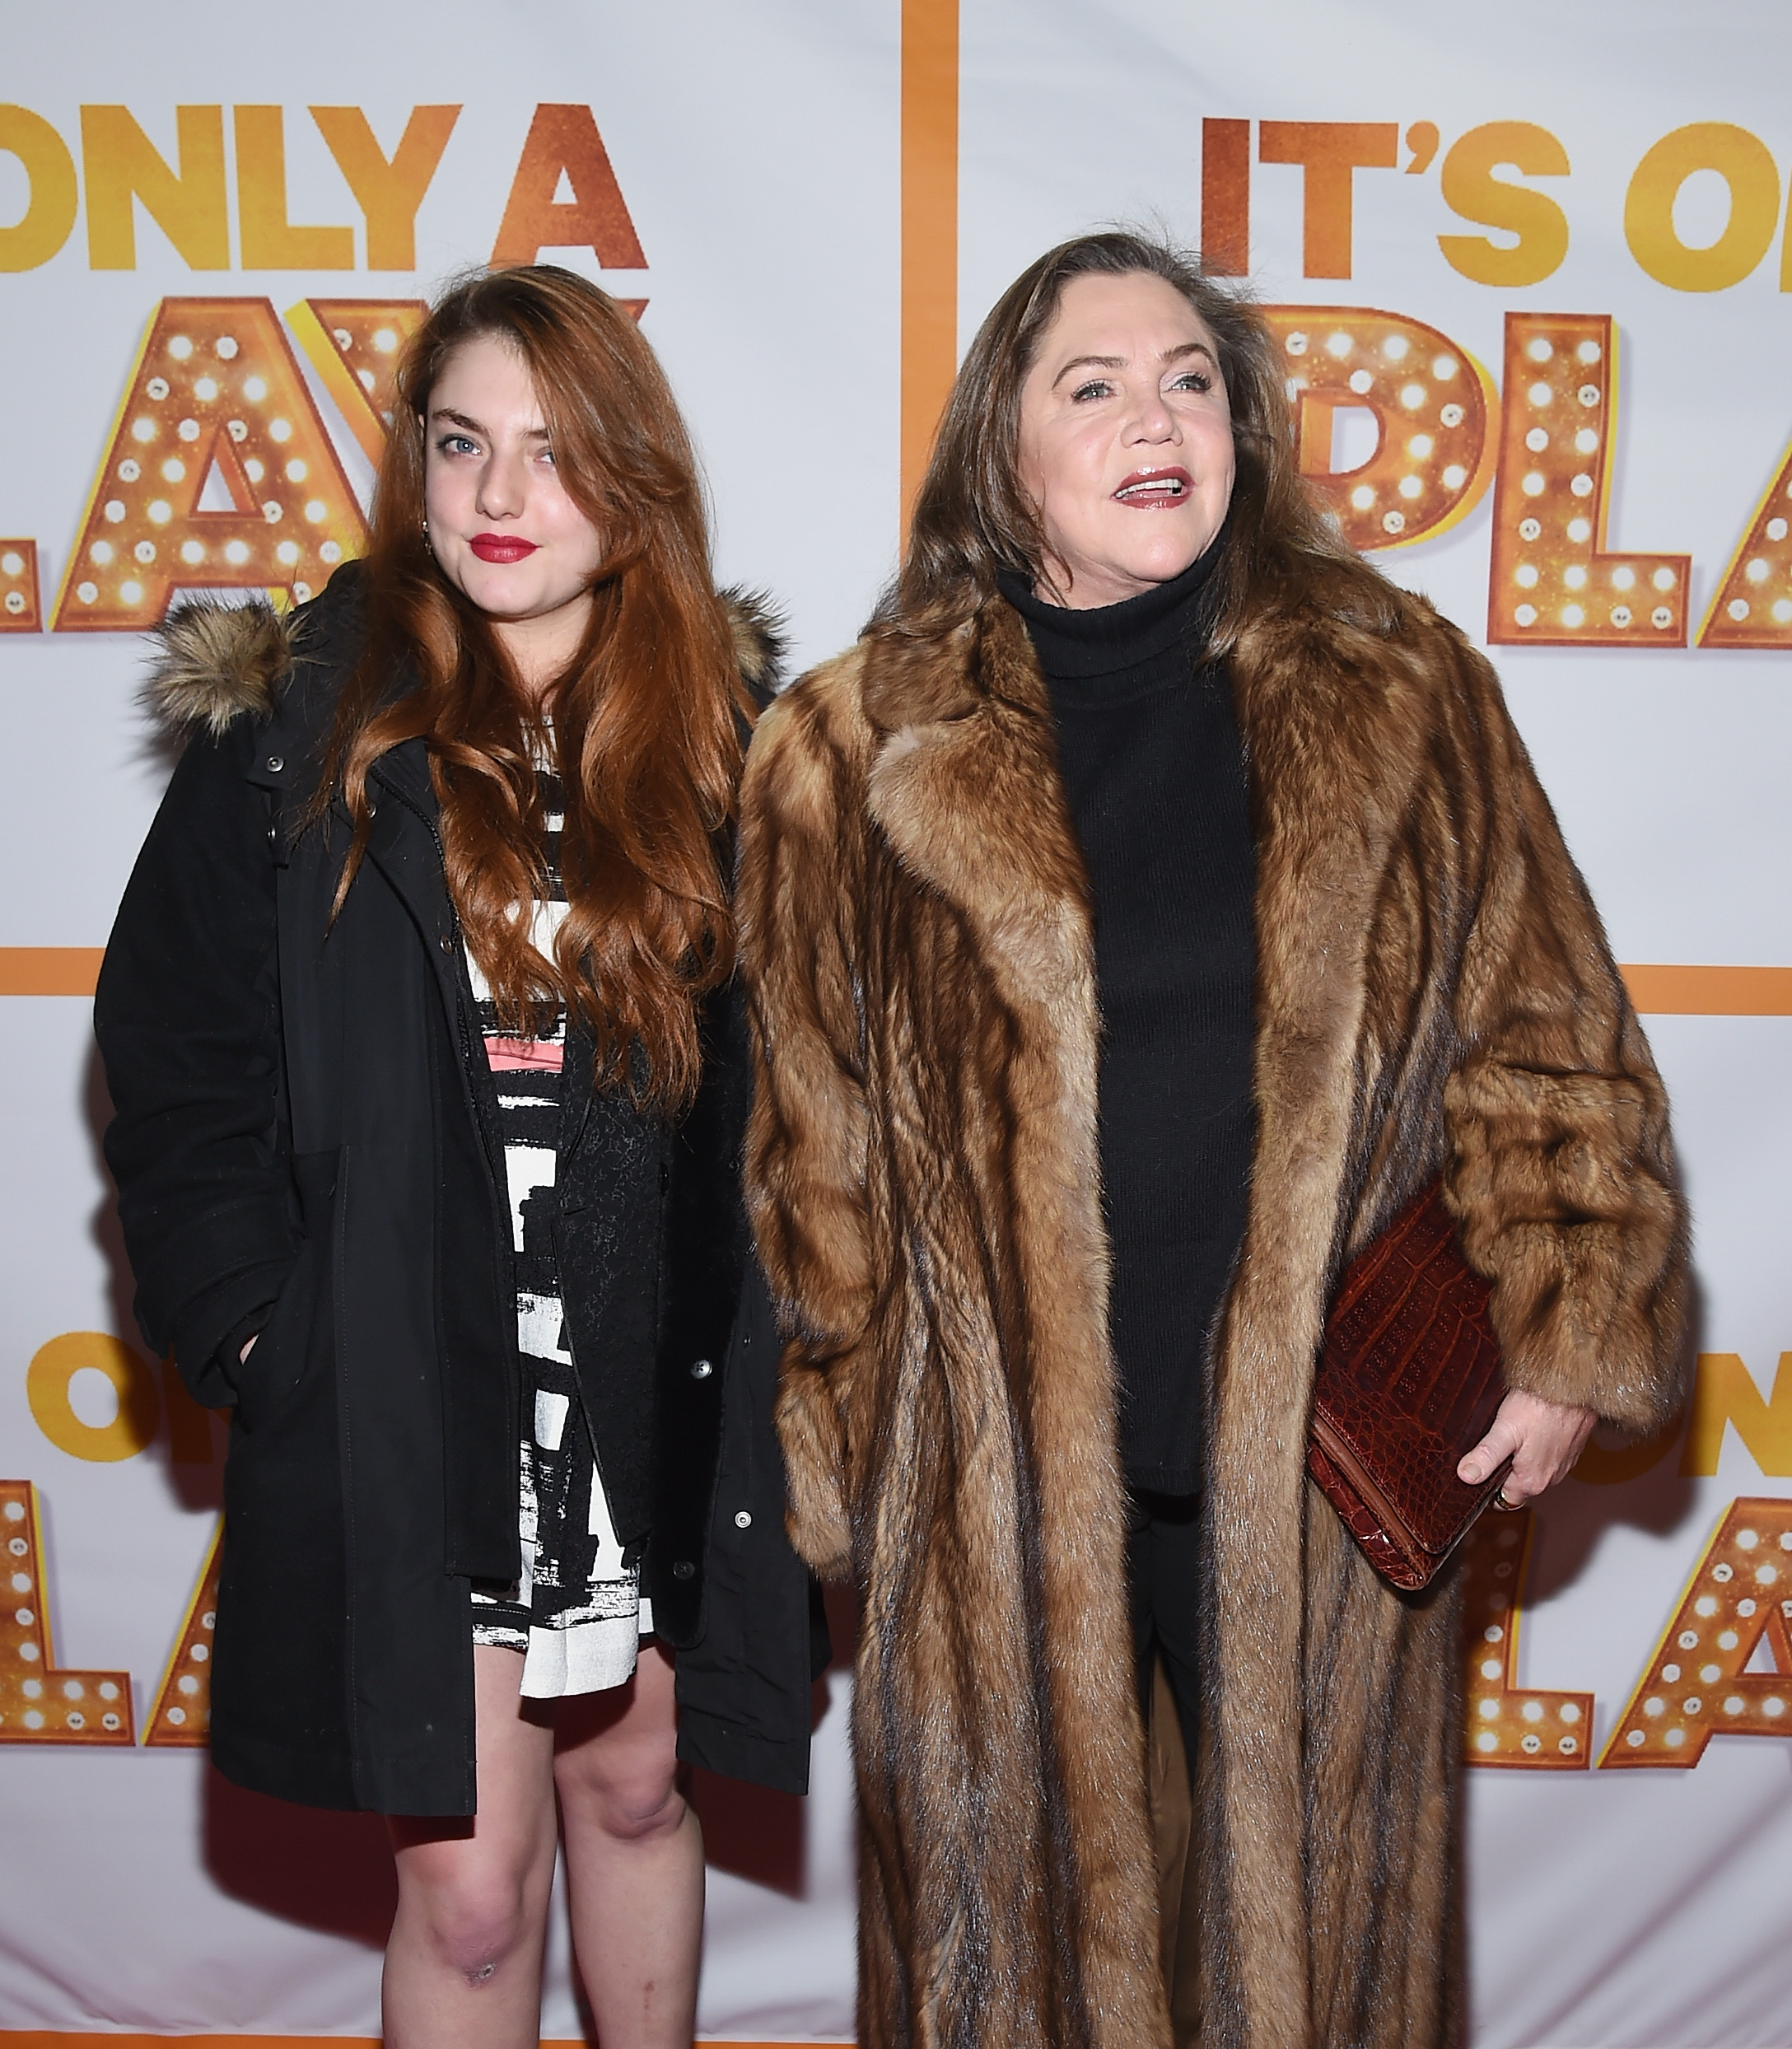 Rachel Ann Weiss (L) and actress Kathleen Turner at The Bernard B. Jacobs Theatre on January 23, 2015 in New York City | Source: Getty Images